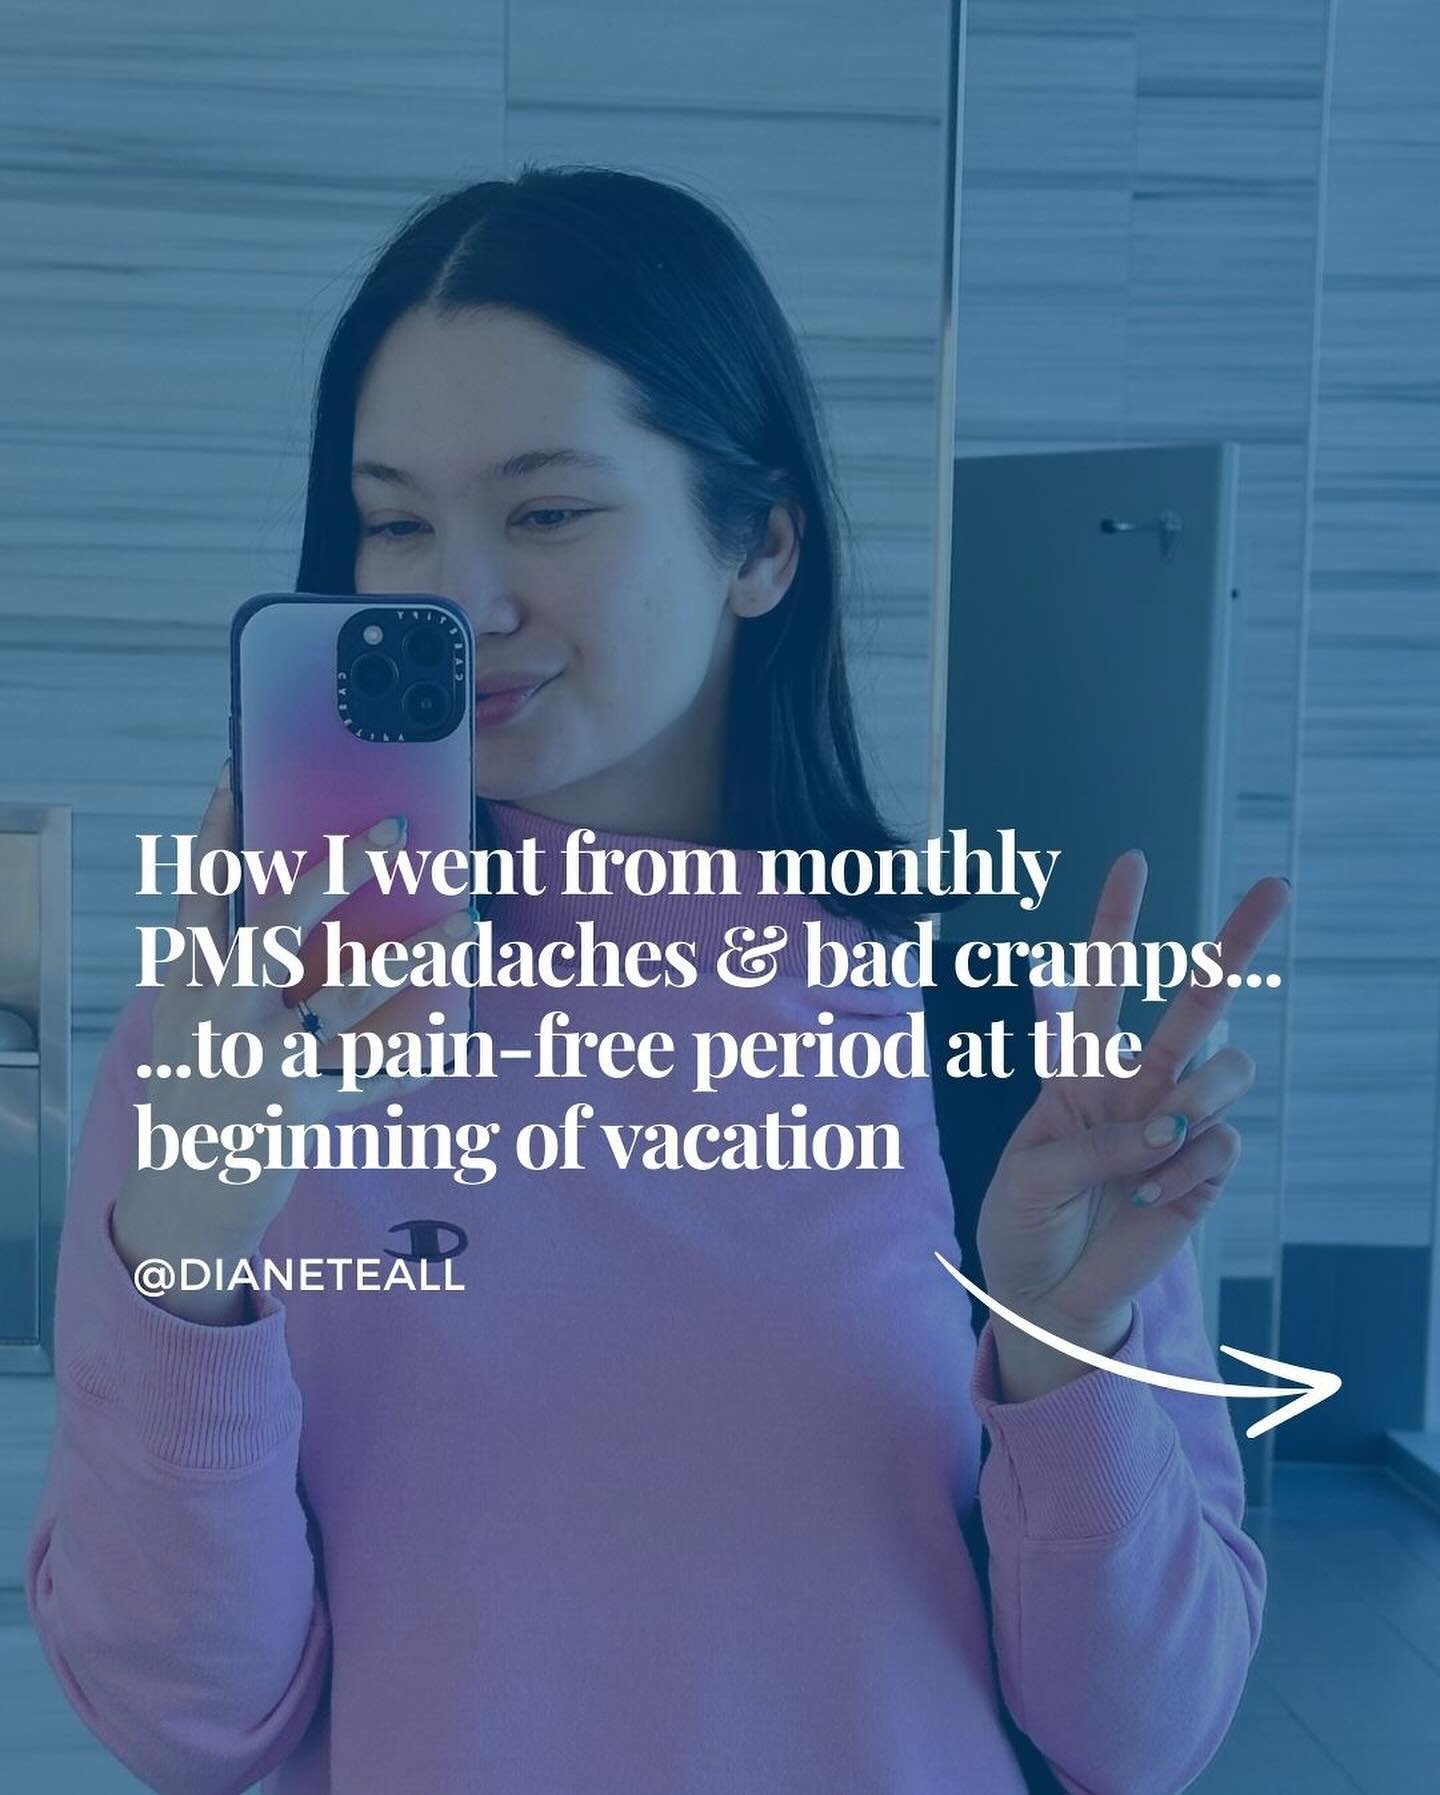 Started from crippling cramps and PMS headaches, now we&rsquo;re here: a natural, regular, pain-free period that was no big deal on our 14hr flight to Japan.

Ya, this is a personal one&hellip; But with a purpose!
Because too many women count themsel